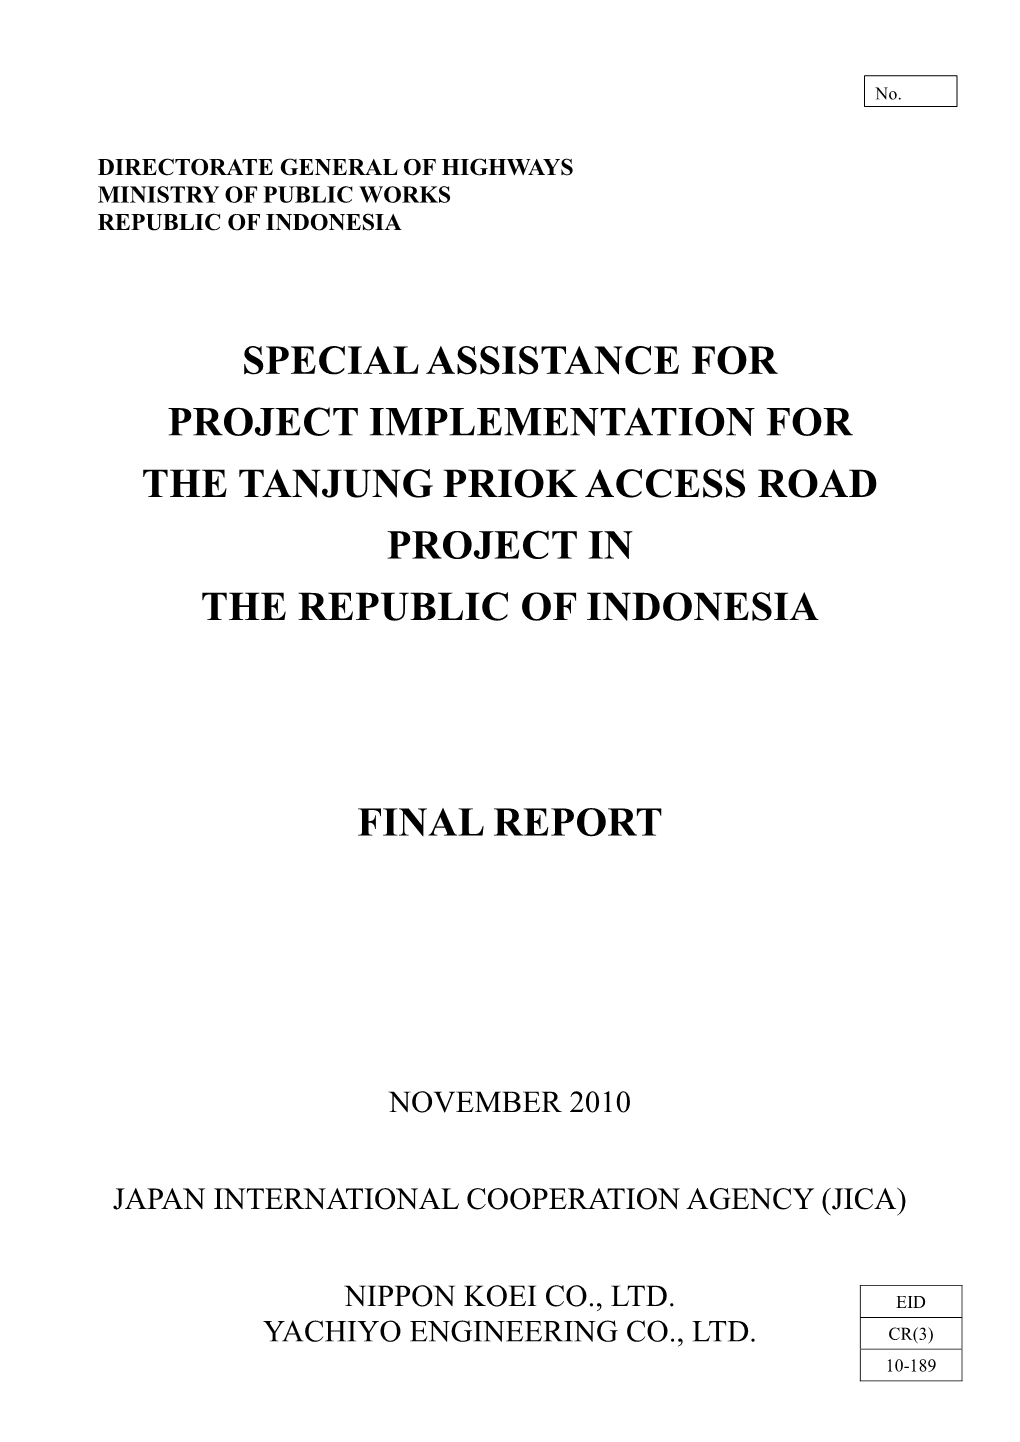 Special Assistance for Project Implementation for the Tanjung Priok Access Road Project in the Republic of Indonesia